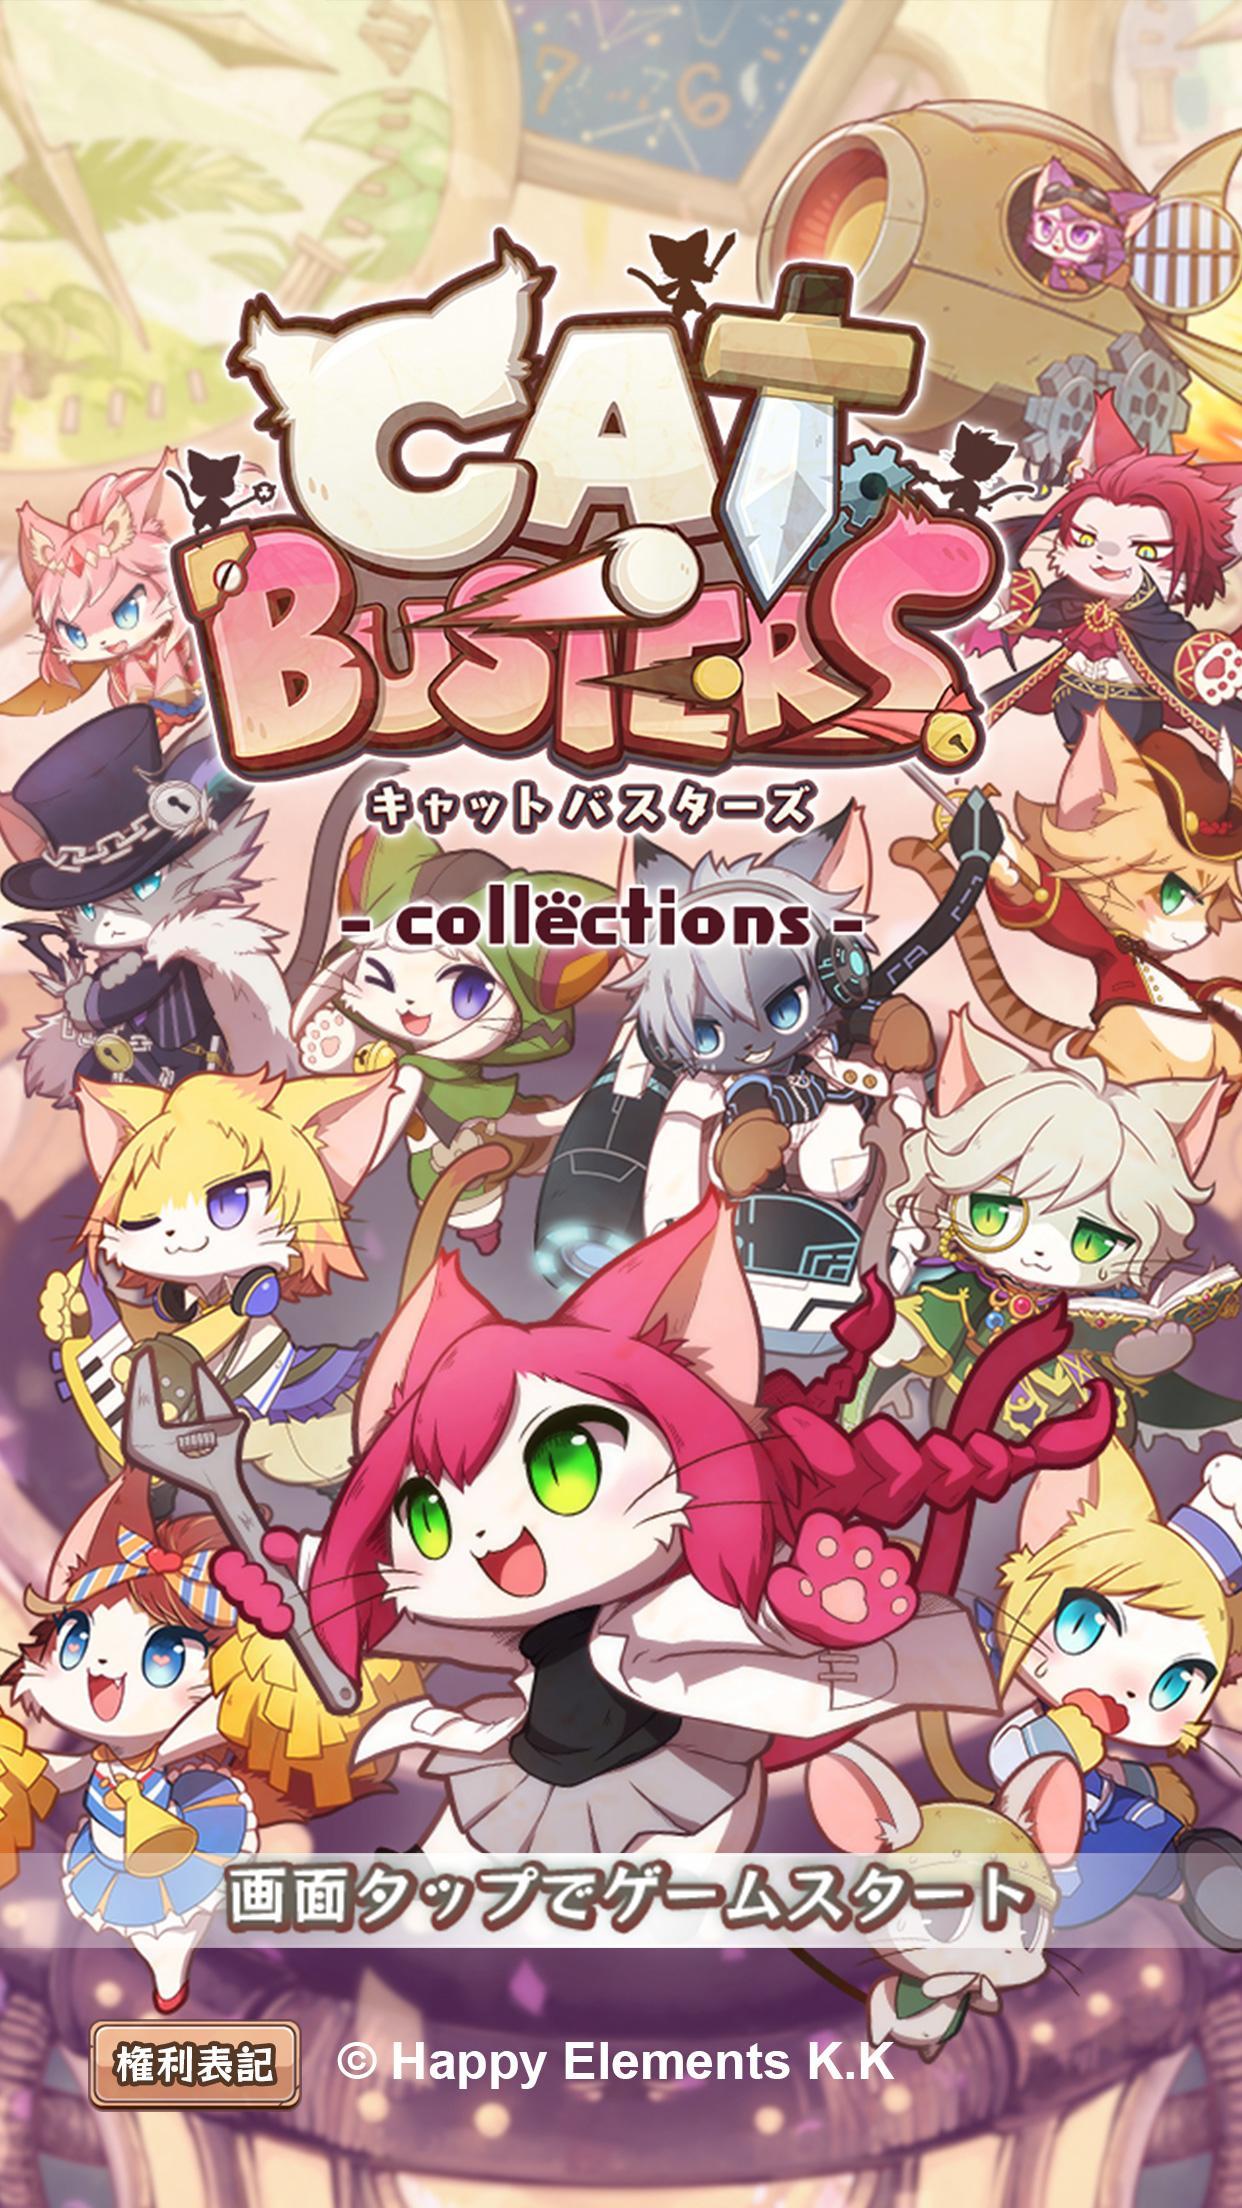 Screenshot 1 of キャットバスターズ - collections - 1.2